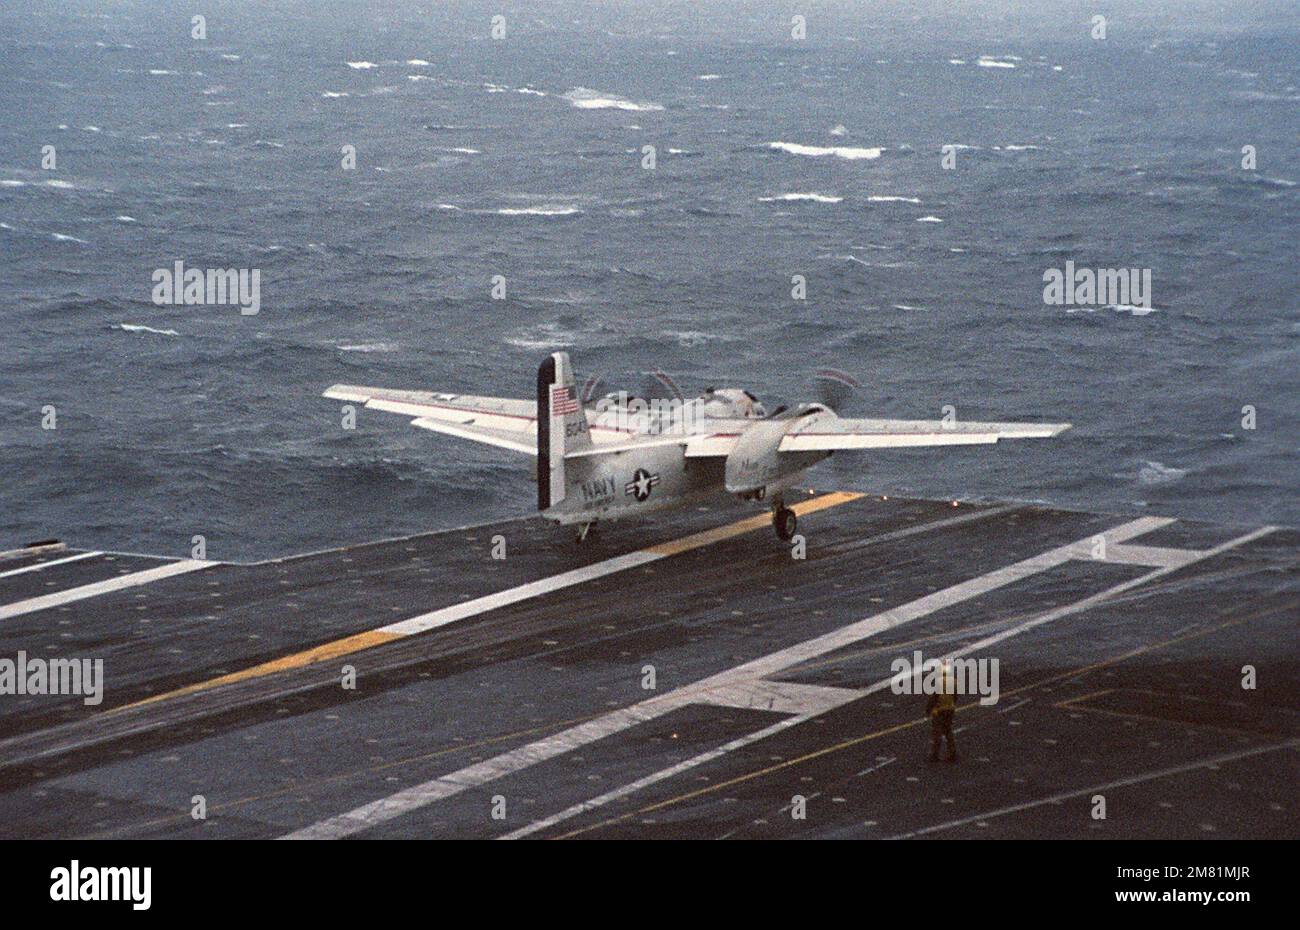 A rear view of a C-1A Trader aircraft as it takes off from the aircraft carrier USS AMERICA (CV 66) during rough weather conditions. Country: Atlantic Ocean (AOC) Stock Photo